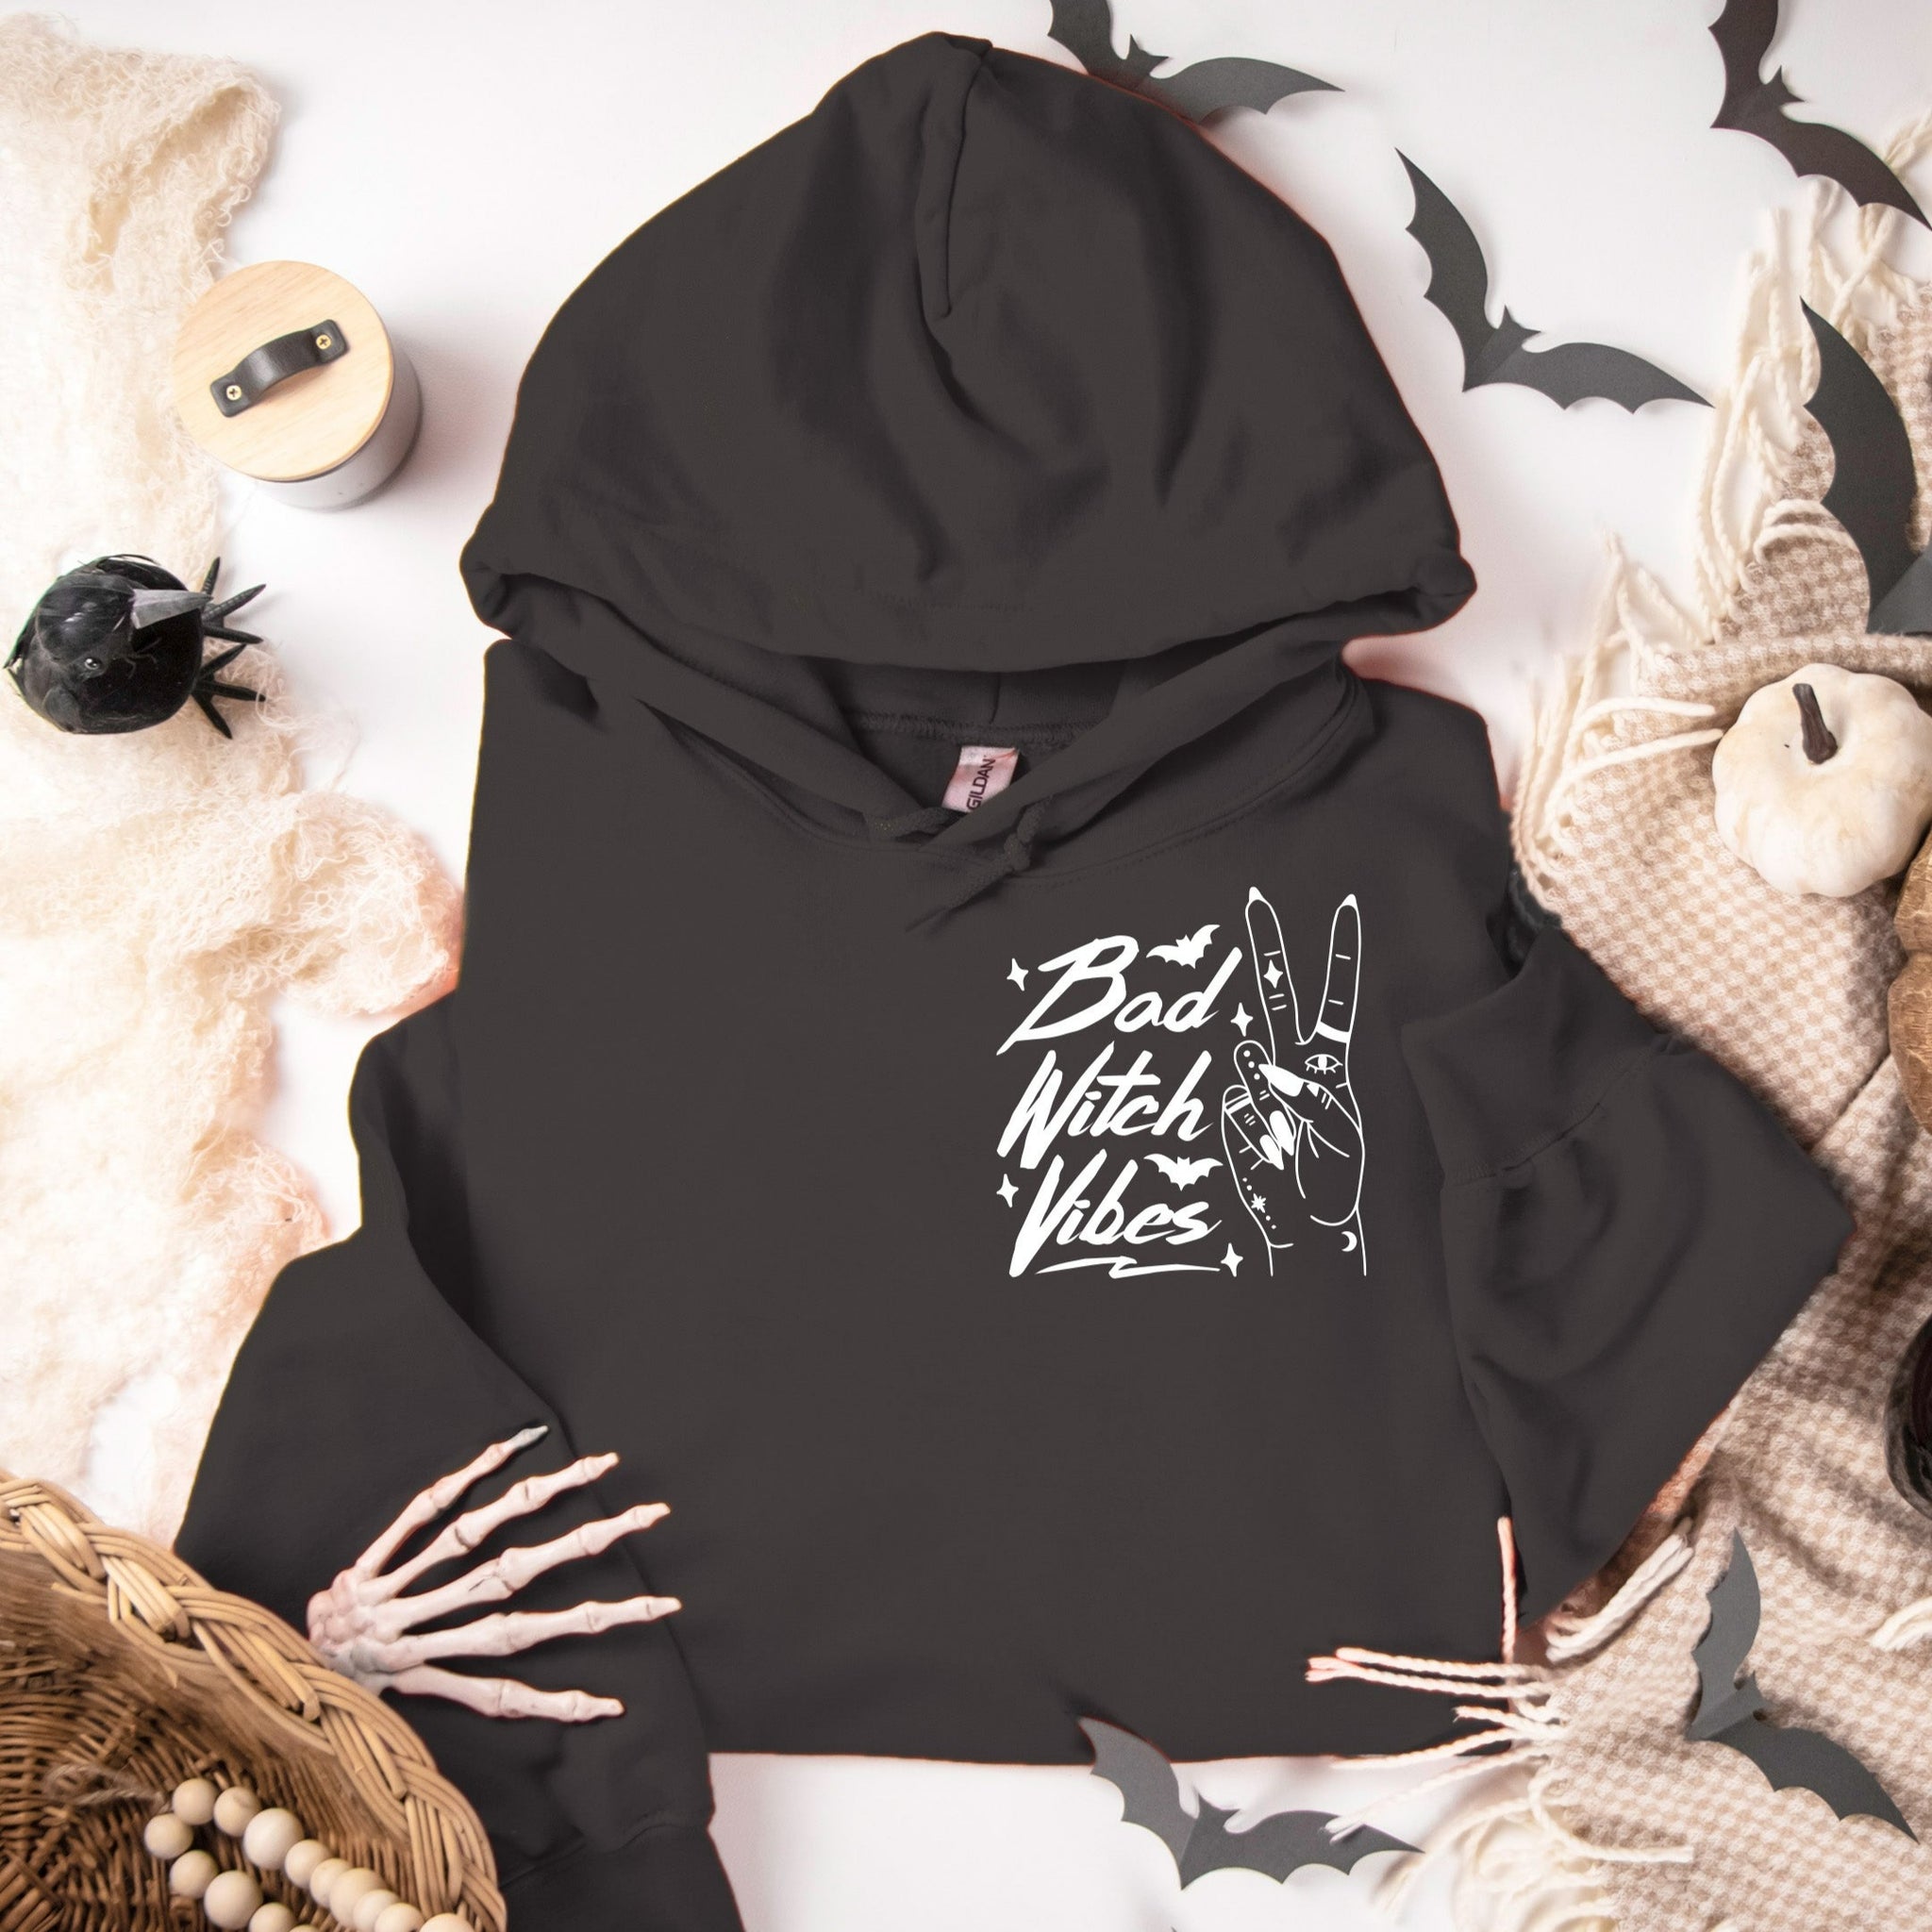 Hoodie Unisex - Bad Witch Vibes